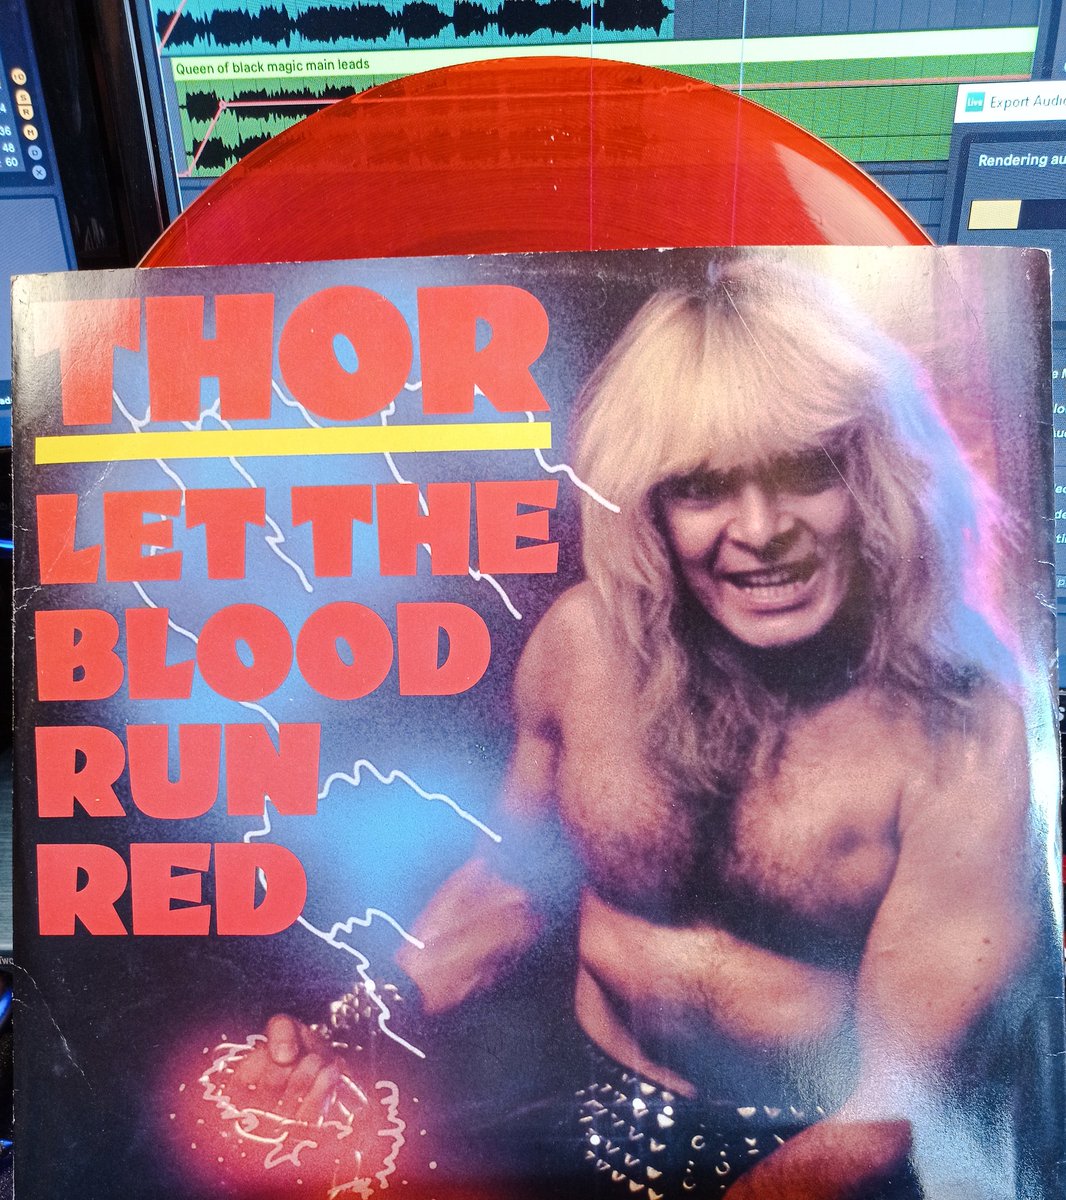 Thor - Let The Blood Run Red. One of my favourite songs ever.

On my list is a 80s metal cover album with songs like this, Piledriver, Accept, Cirith Until and Shiva in the style of Midnight. Who's in?! https://t.co/JKTtjkQlkF